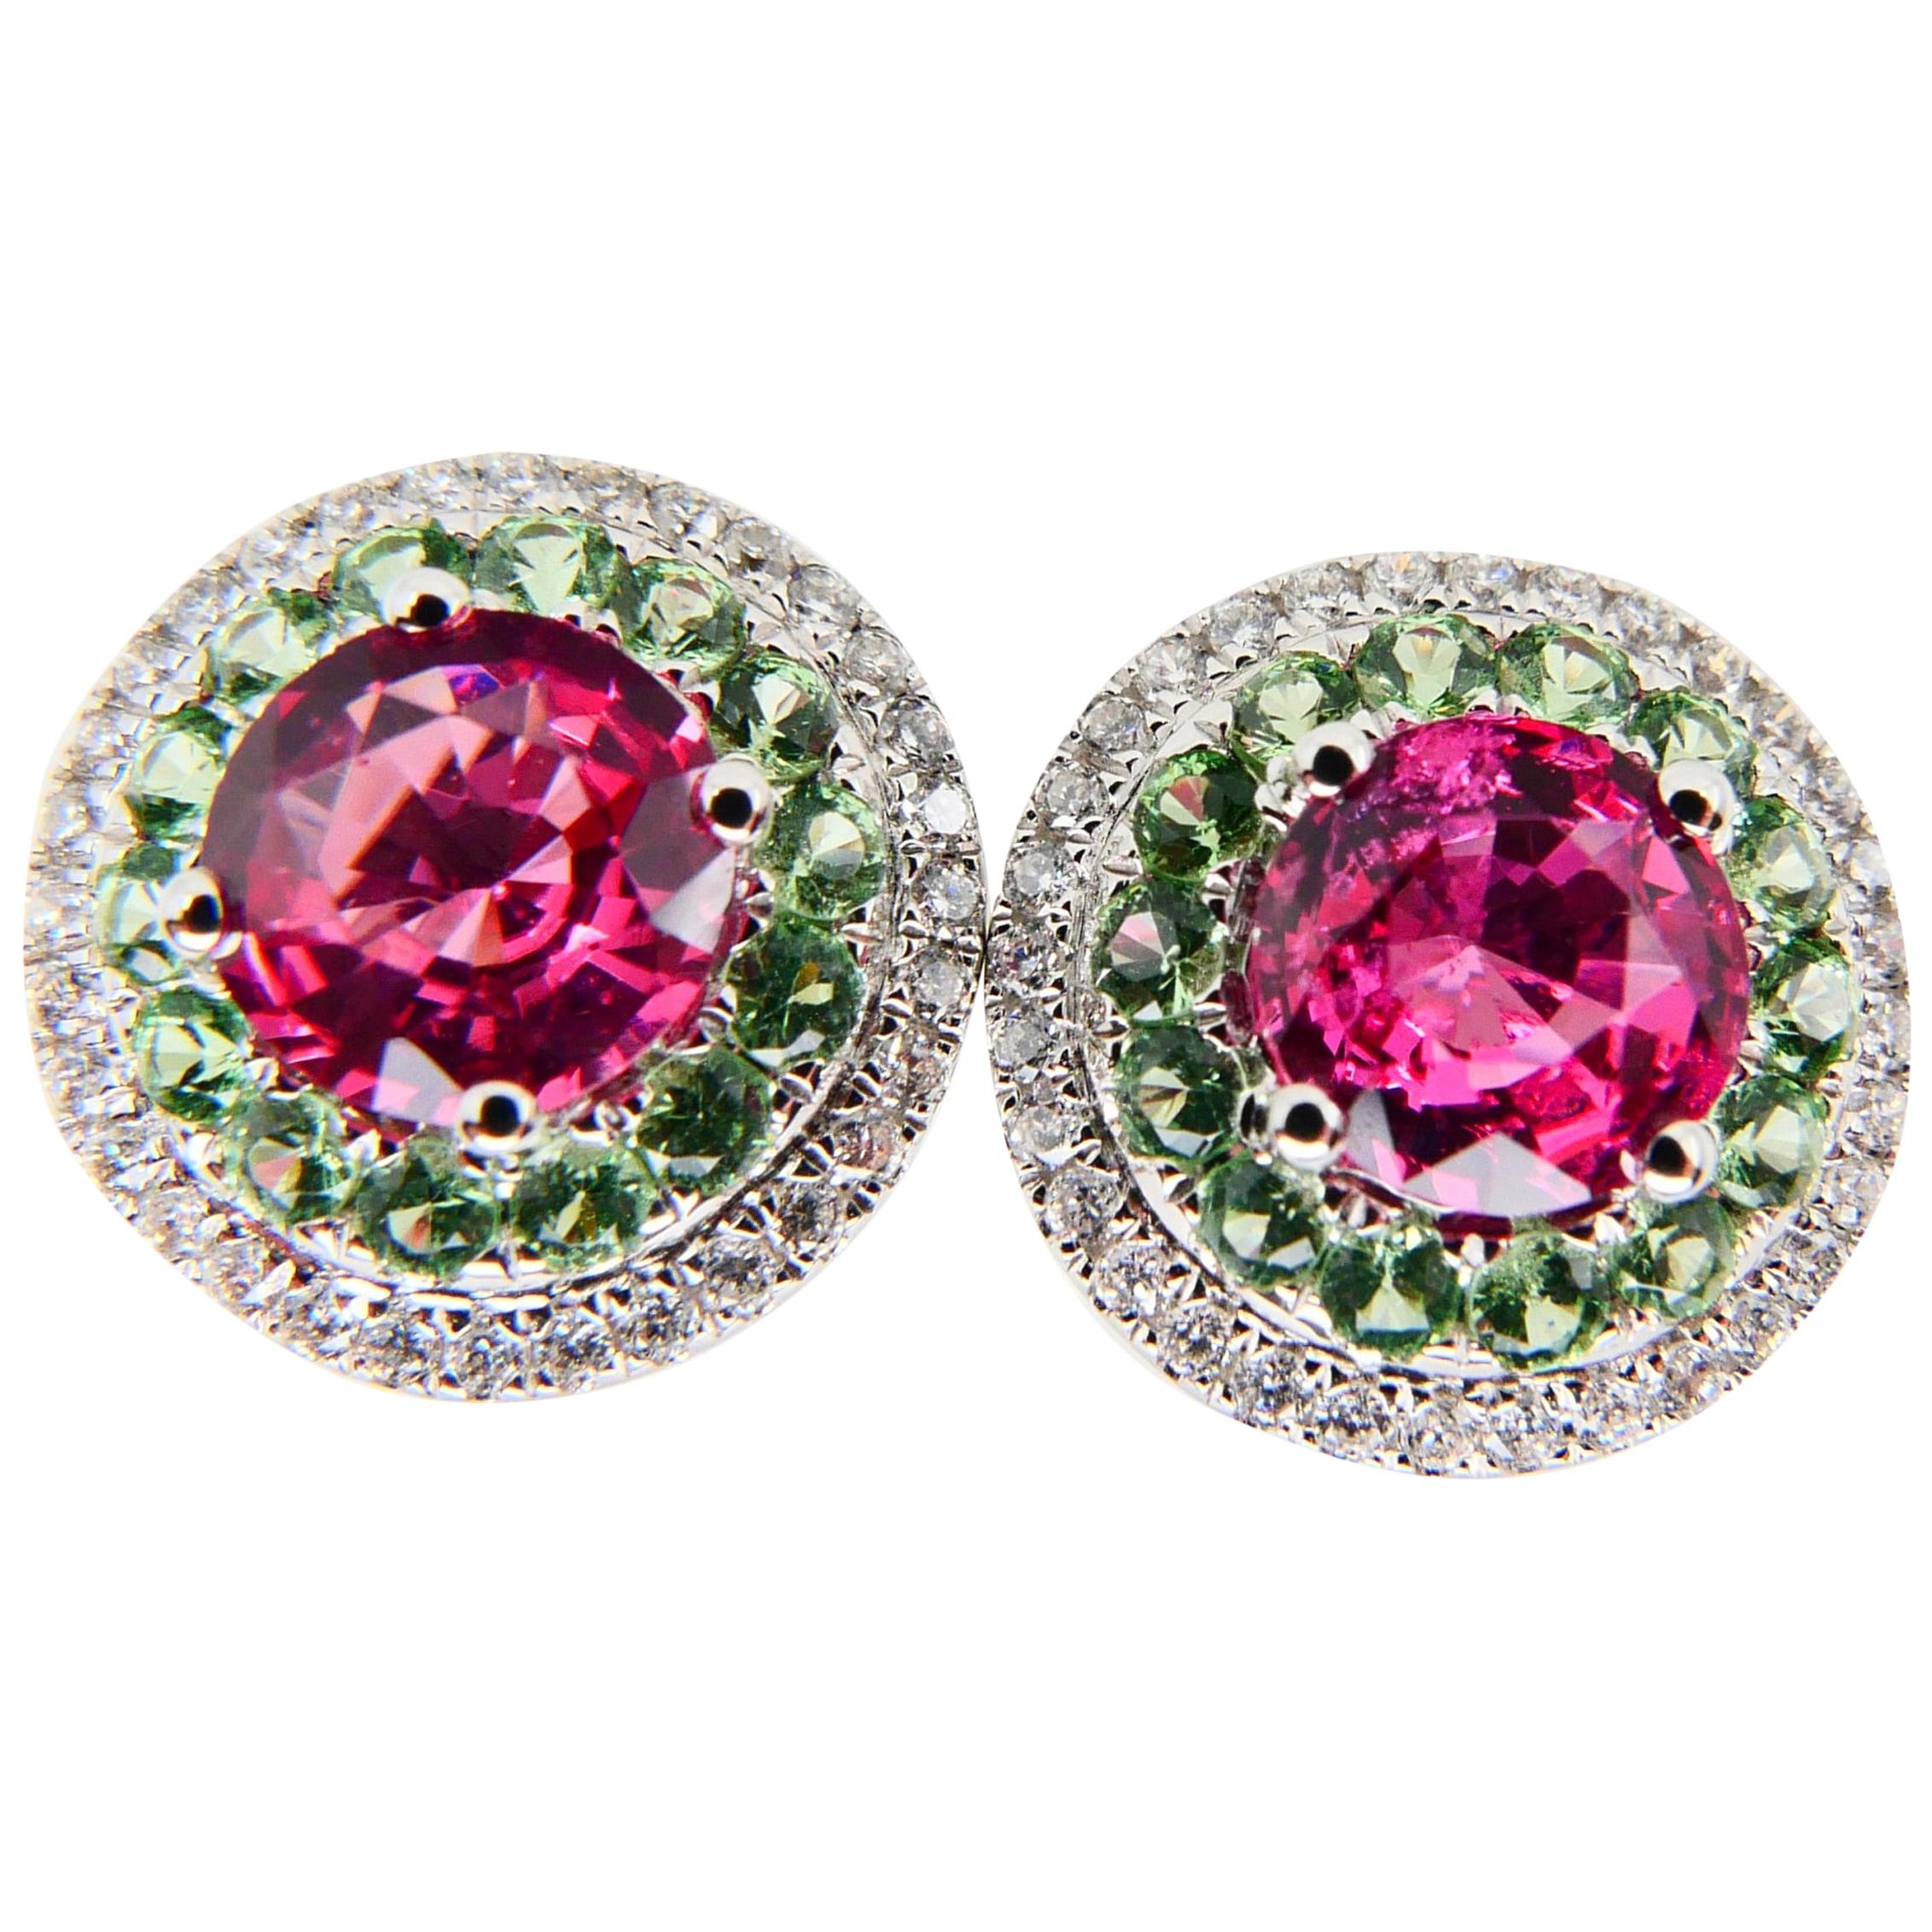 Natural 1.53 Carat Vivid Neon Pink Spinel Peridot and Diamond Earrings, 18k Gold